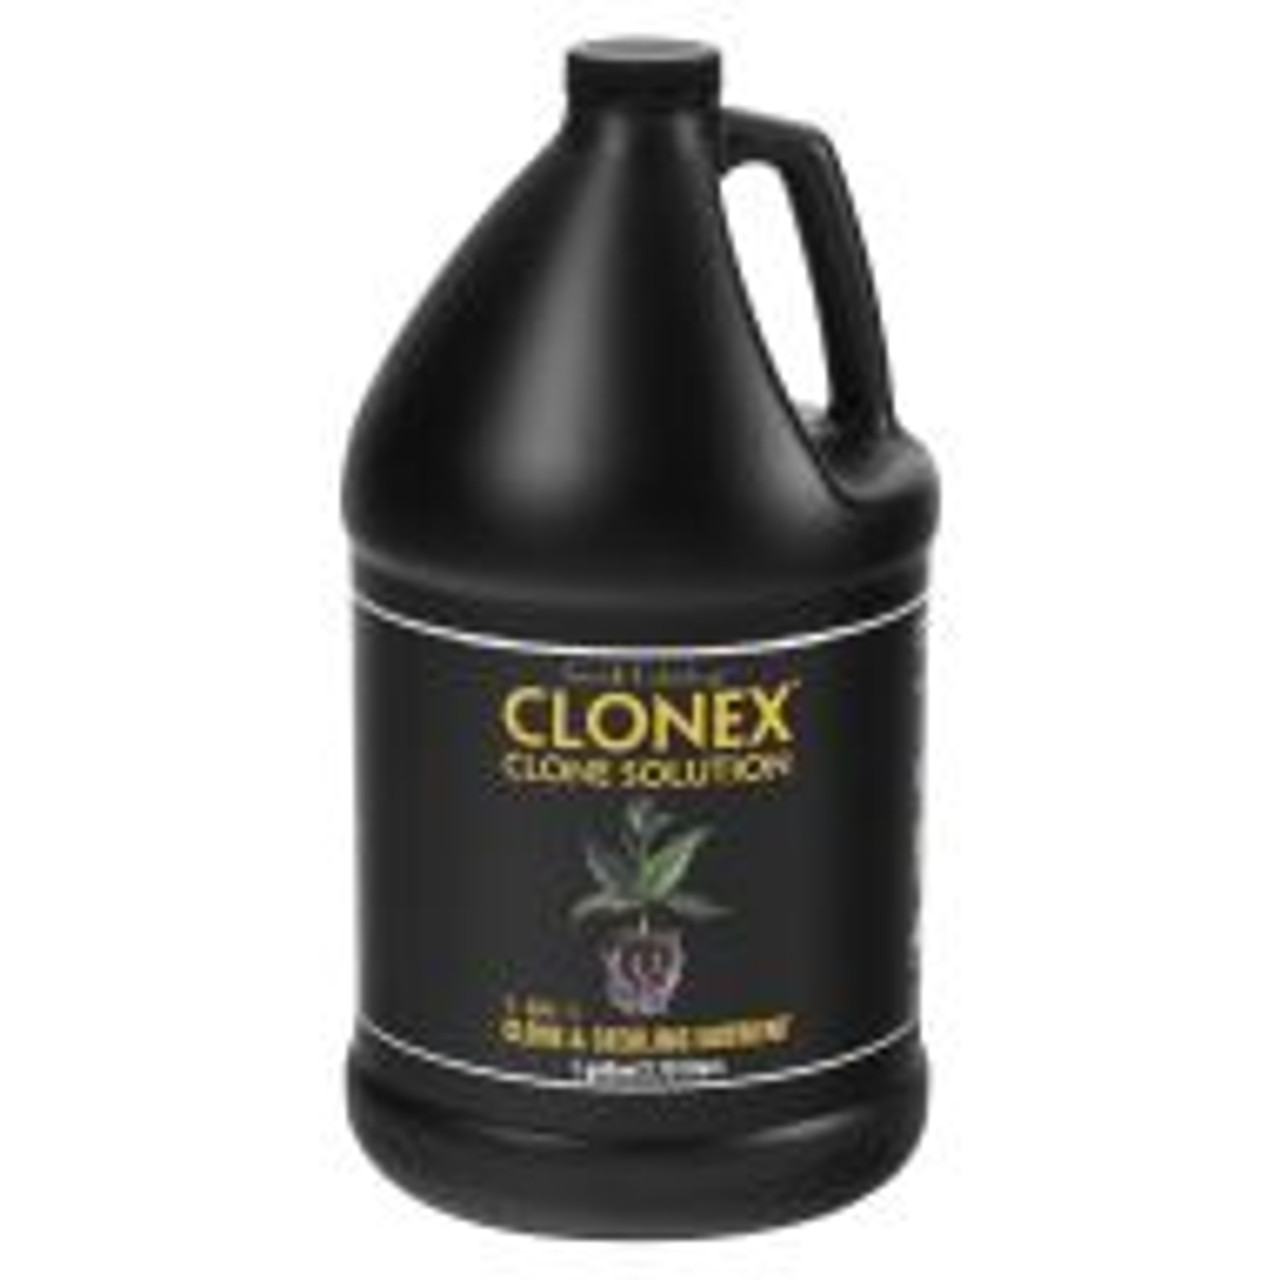 Formulated with a special blend of minerals, vitamins, wetting agents and a root promoter, Clonex Clone Solution nourishes new root cells to encourage rapid root development with minimum propagation stress. Clonex Clone Solution can be applied directly over the rooting medium or sprayed over young clones, and it can be used with Clonex Gel or other rooting agents.